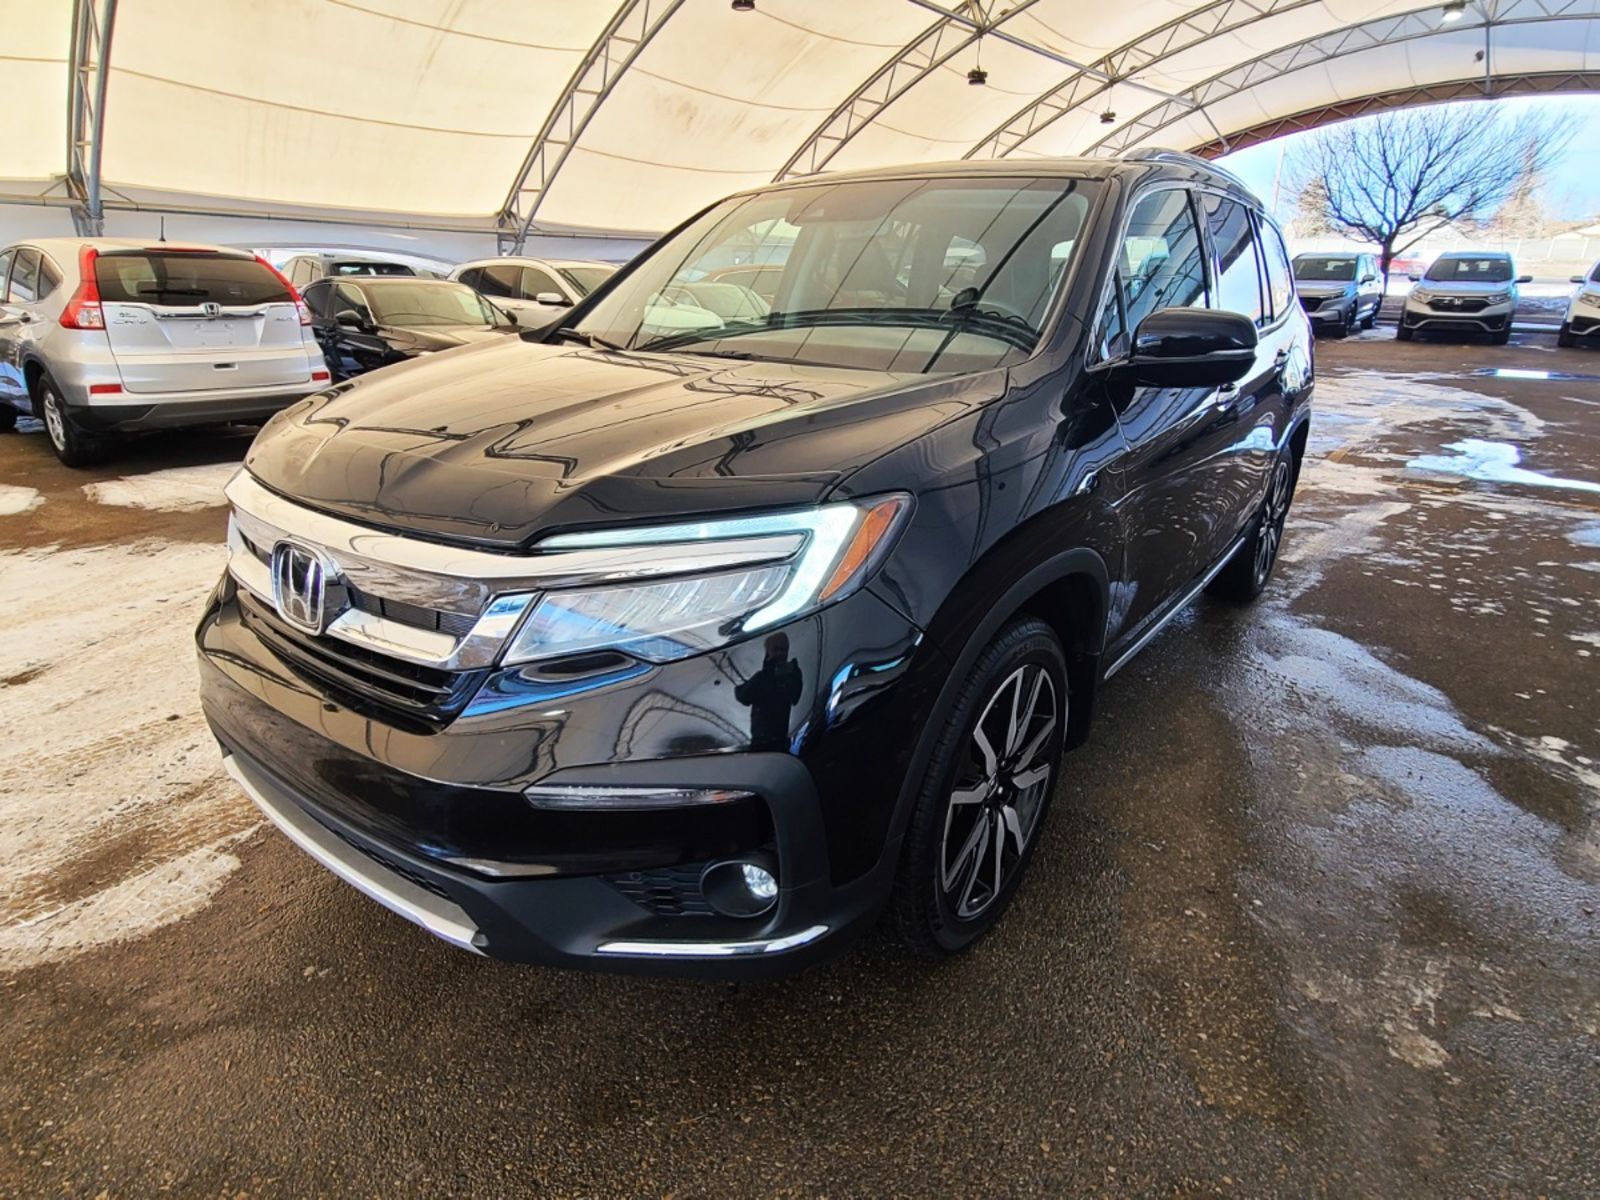 2019 Honda Pilot No Accidents, One Owner, Leather